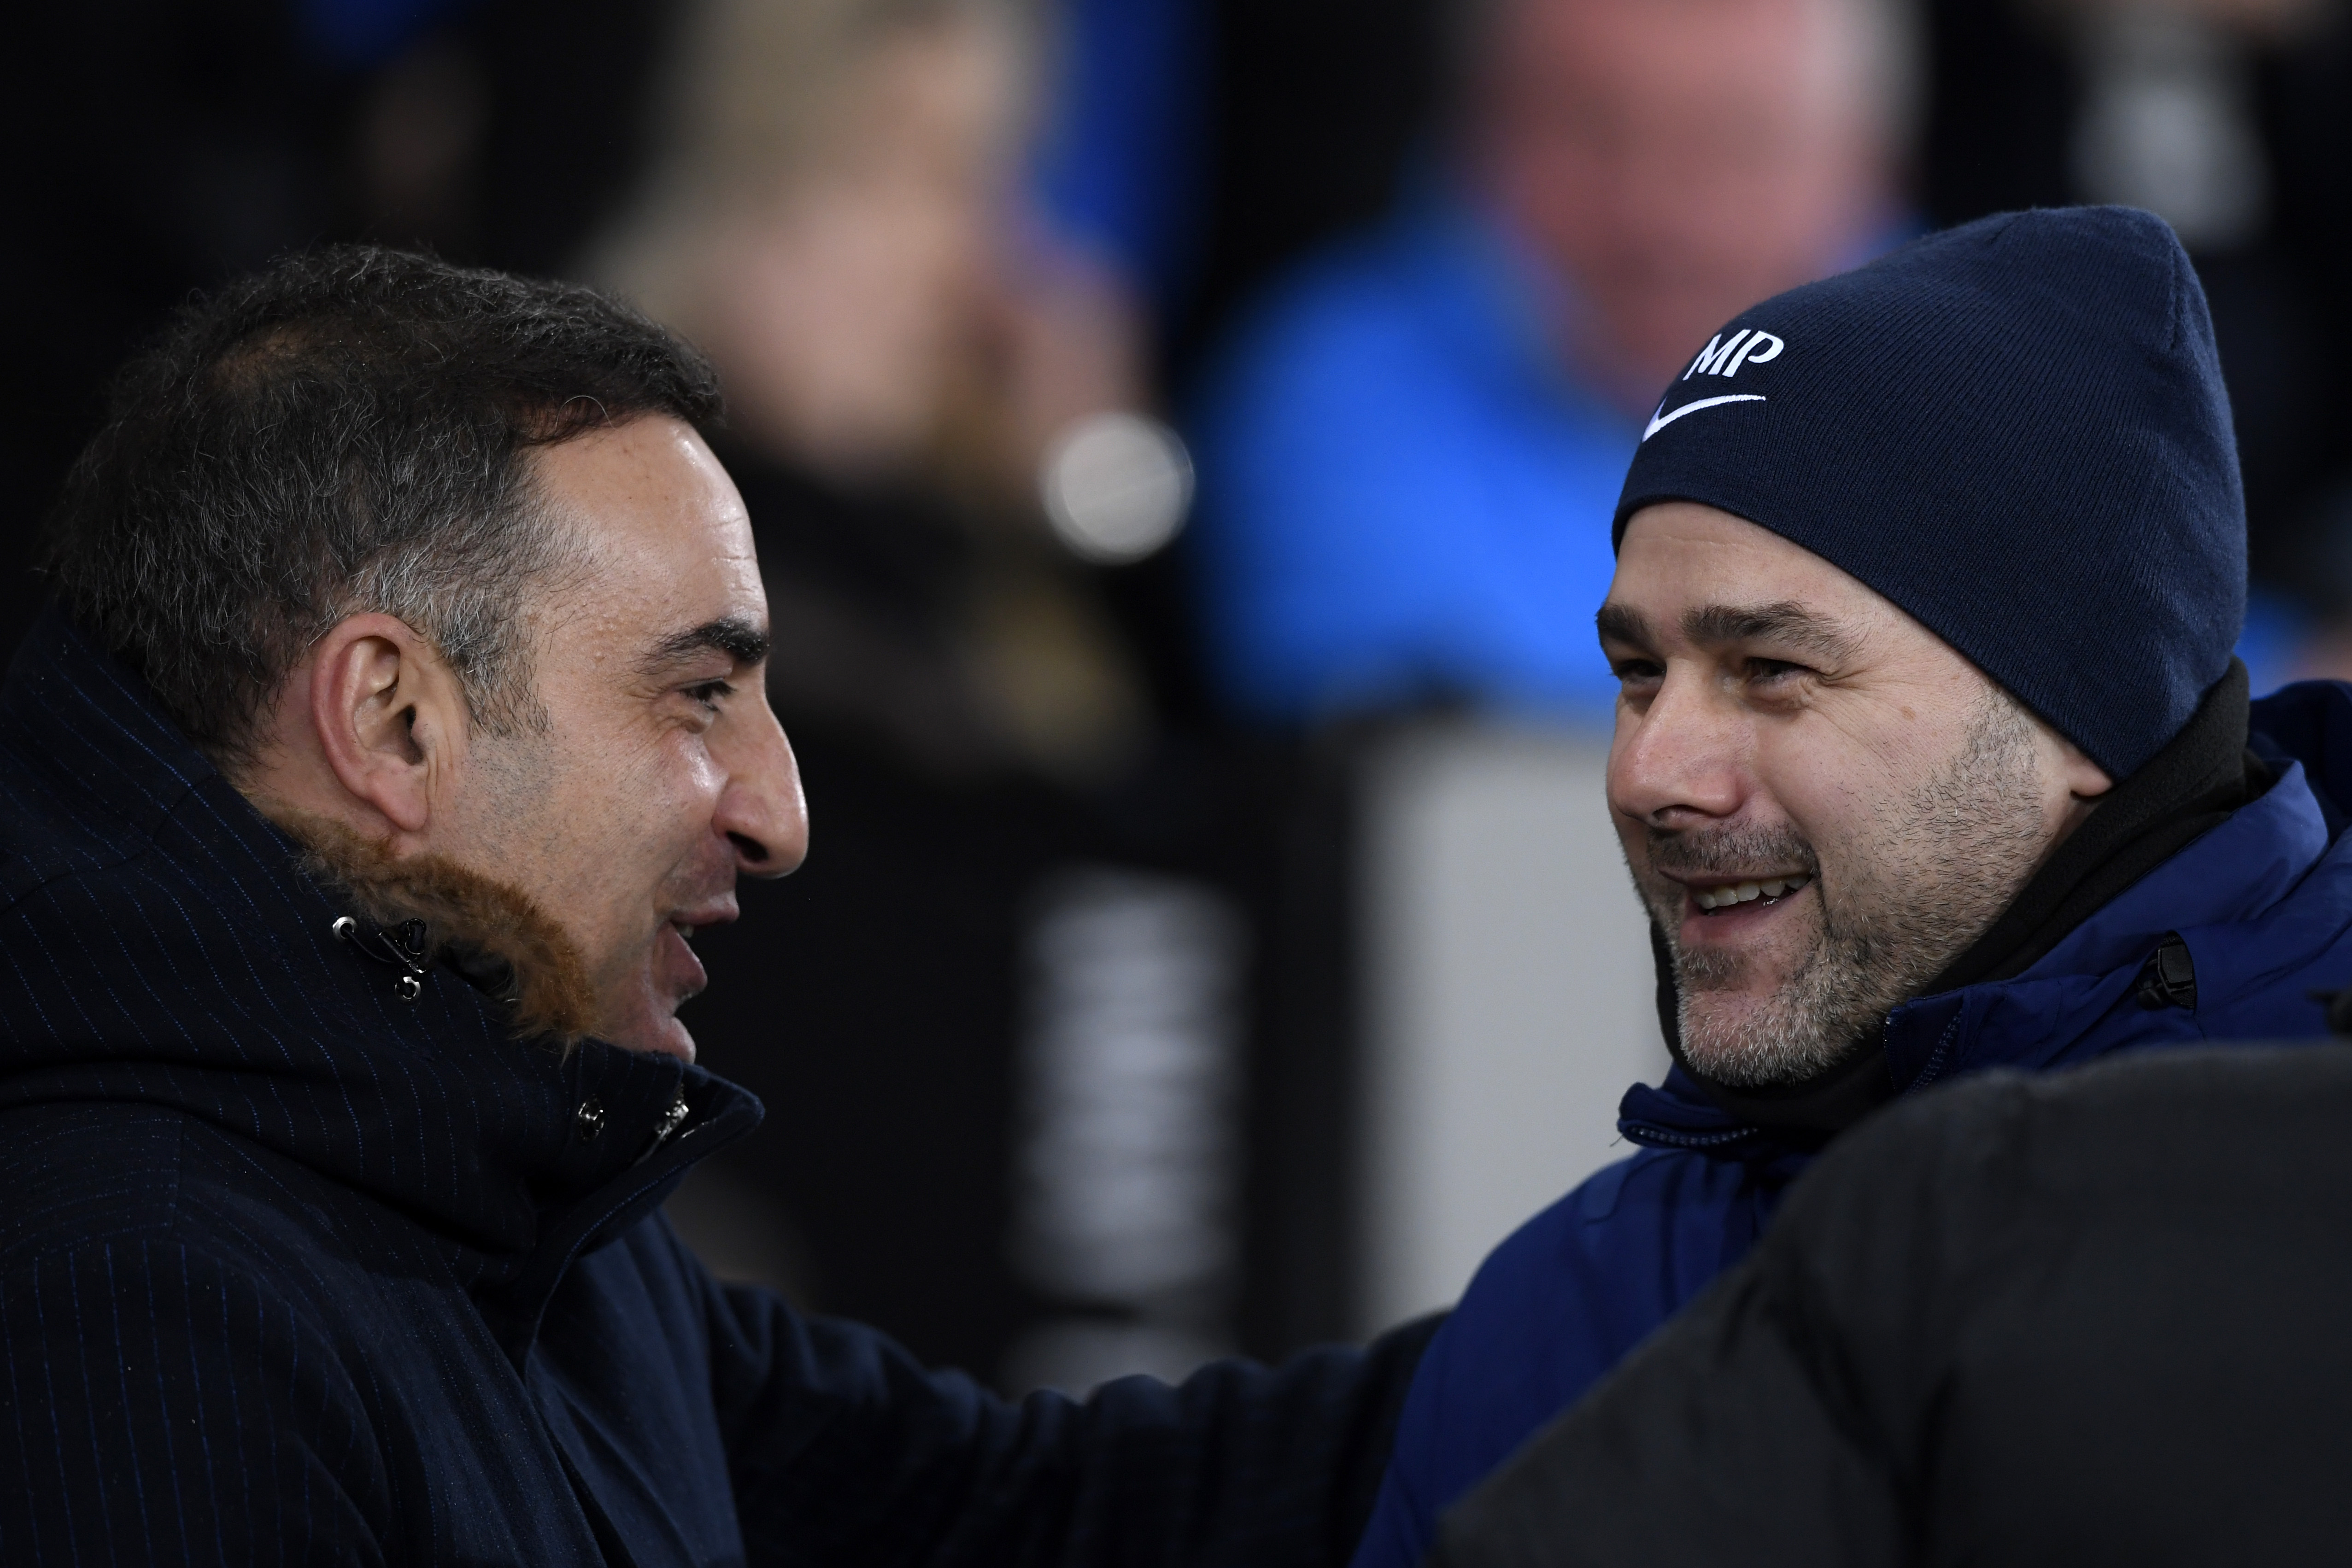 SWANSEA, WALES - JANUARY 02: Carlos Carvalhal, Manager of Swansea City and Mauricio Pochettino, Manager of Tottenham Hotspur embrace prior to the Premier League match between Swansea City and Tottenham Hotspur at Liberty Stadium on January 2, 2018 in Swansea, Wales.  (Photo by Stu Forster/Getty Images)